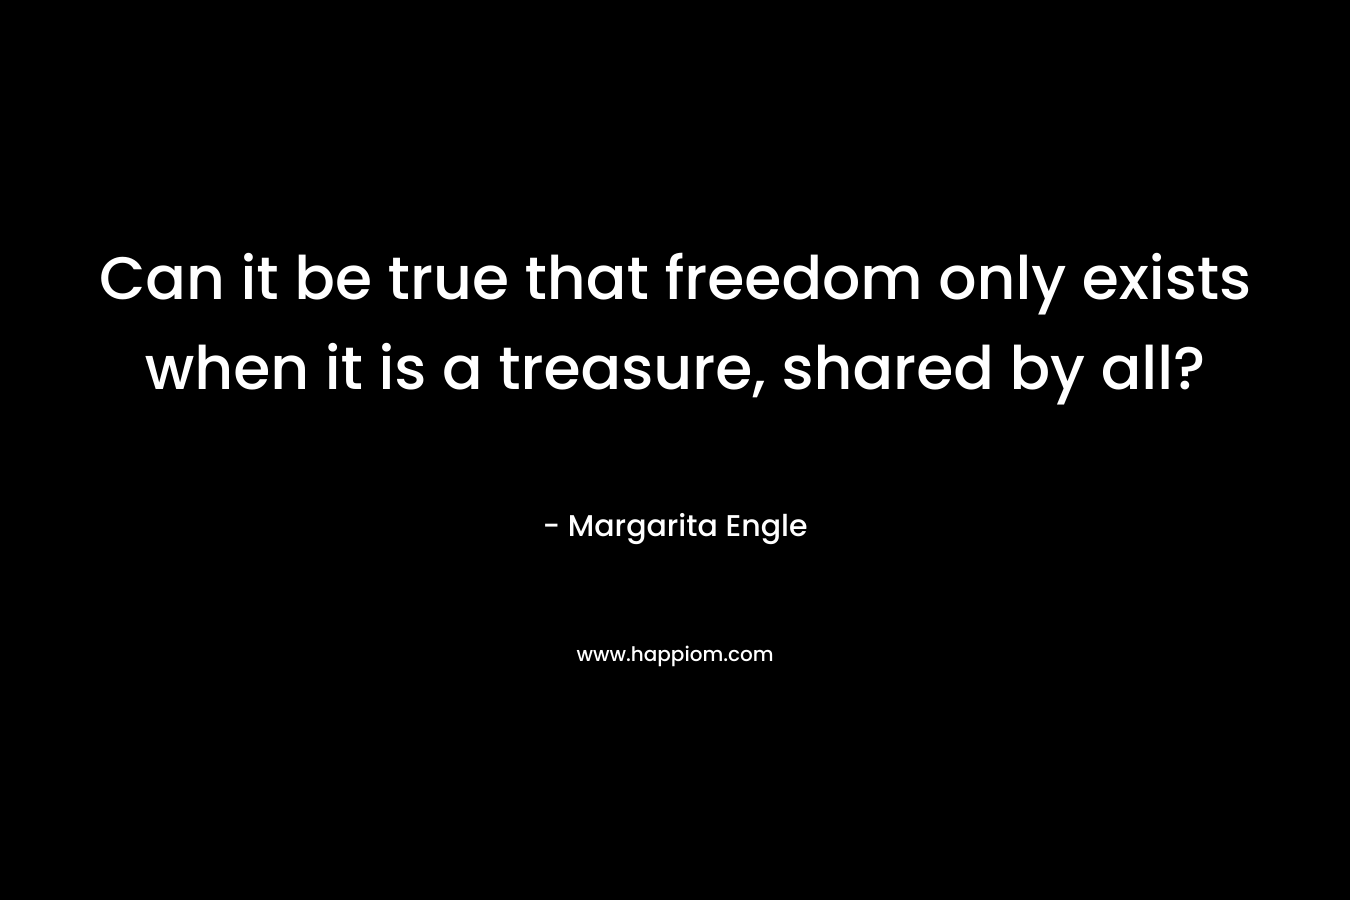 Can it be true that freedom only exists when it is a treasure, shared by all?